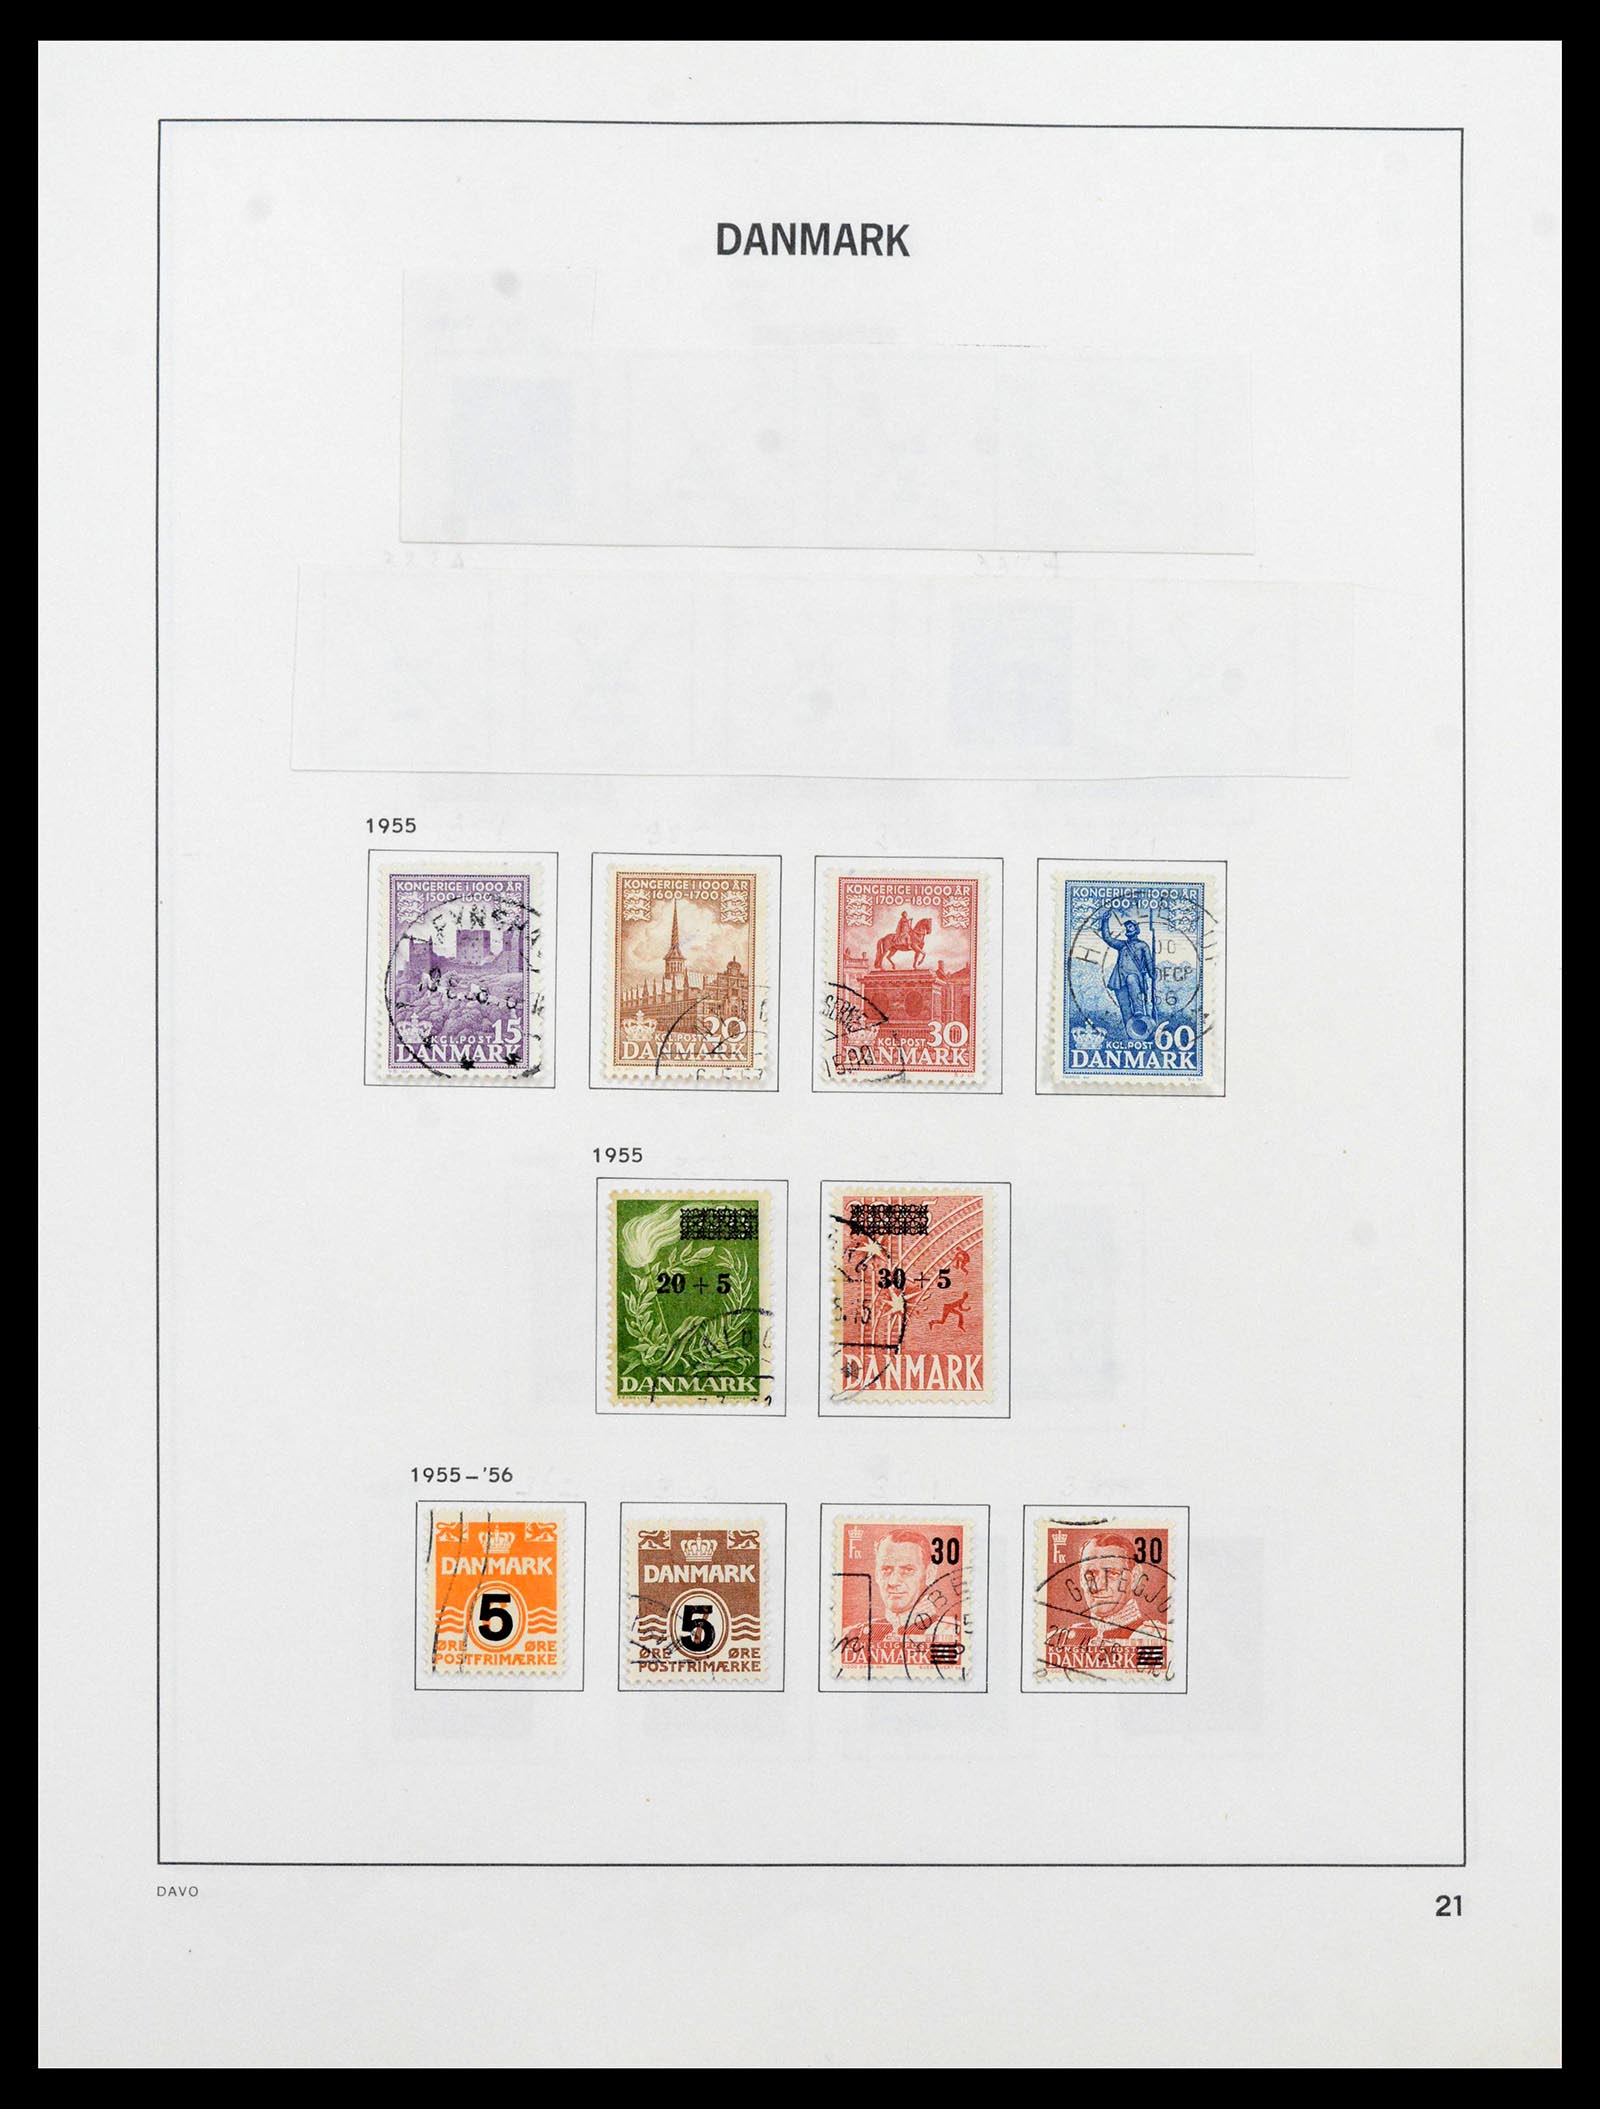 39428 0023 - Stamp collection 39428 Denmark 1851-2019.